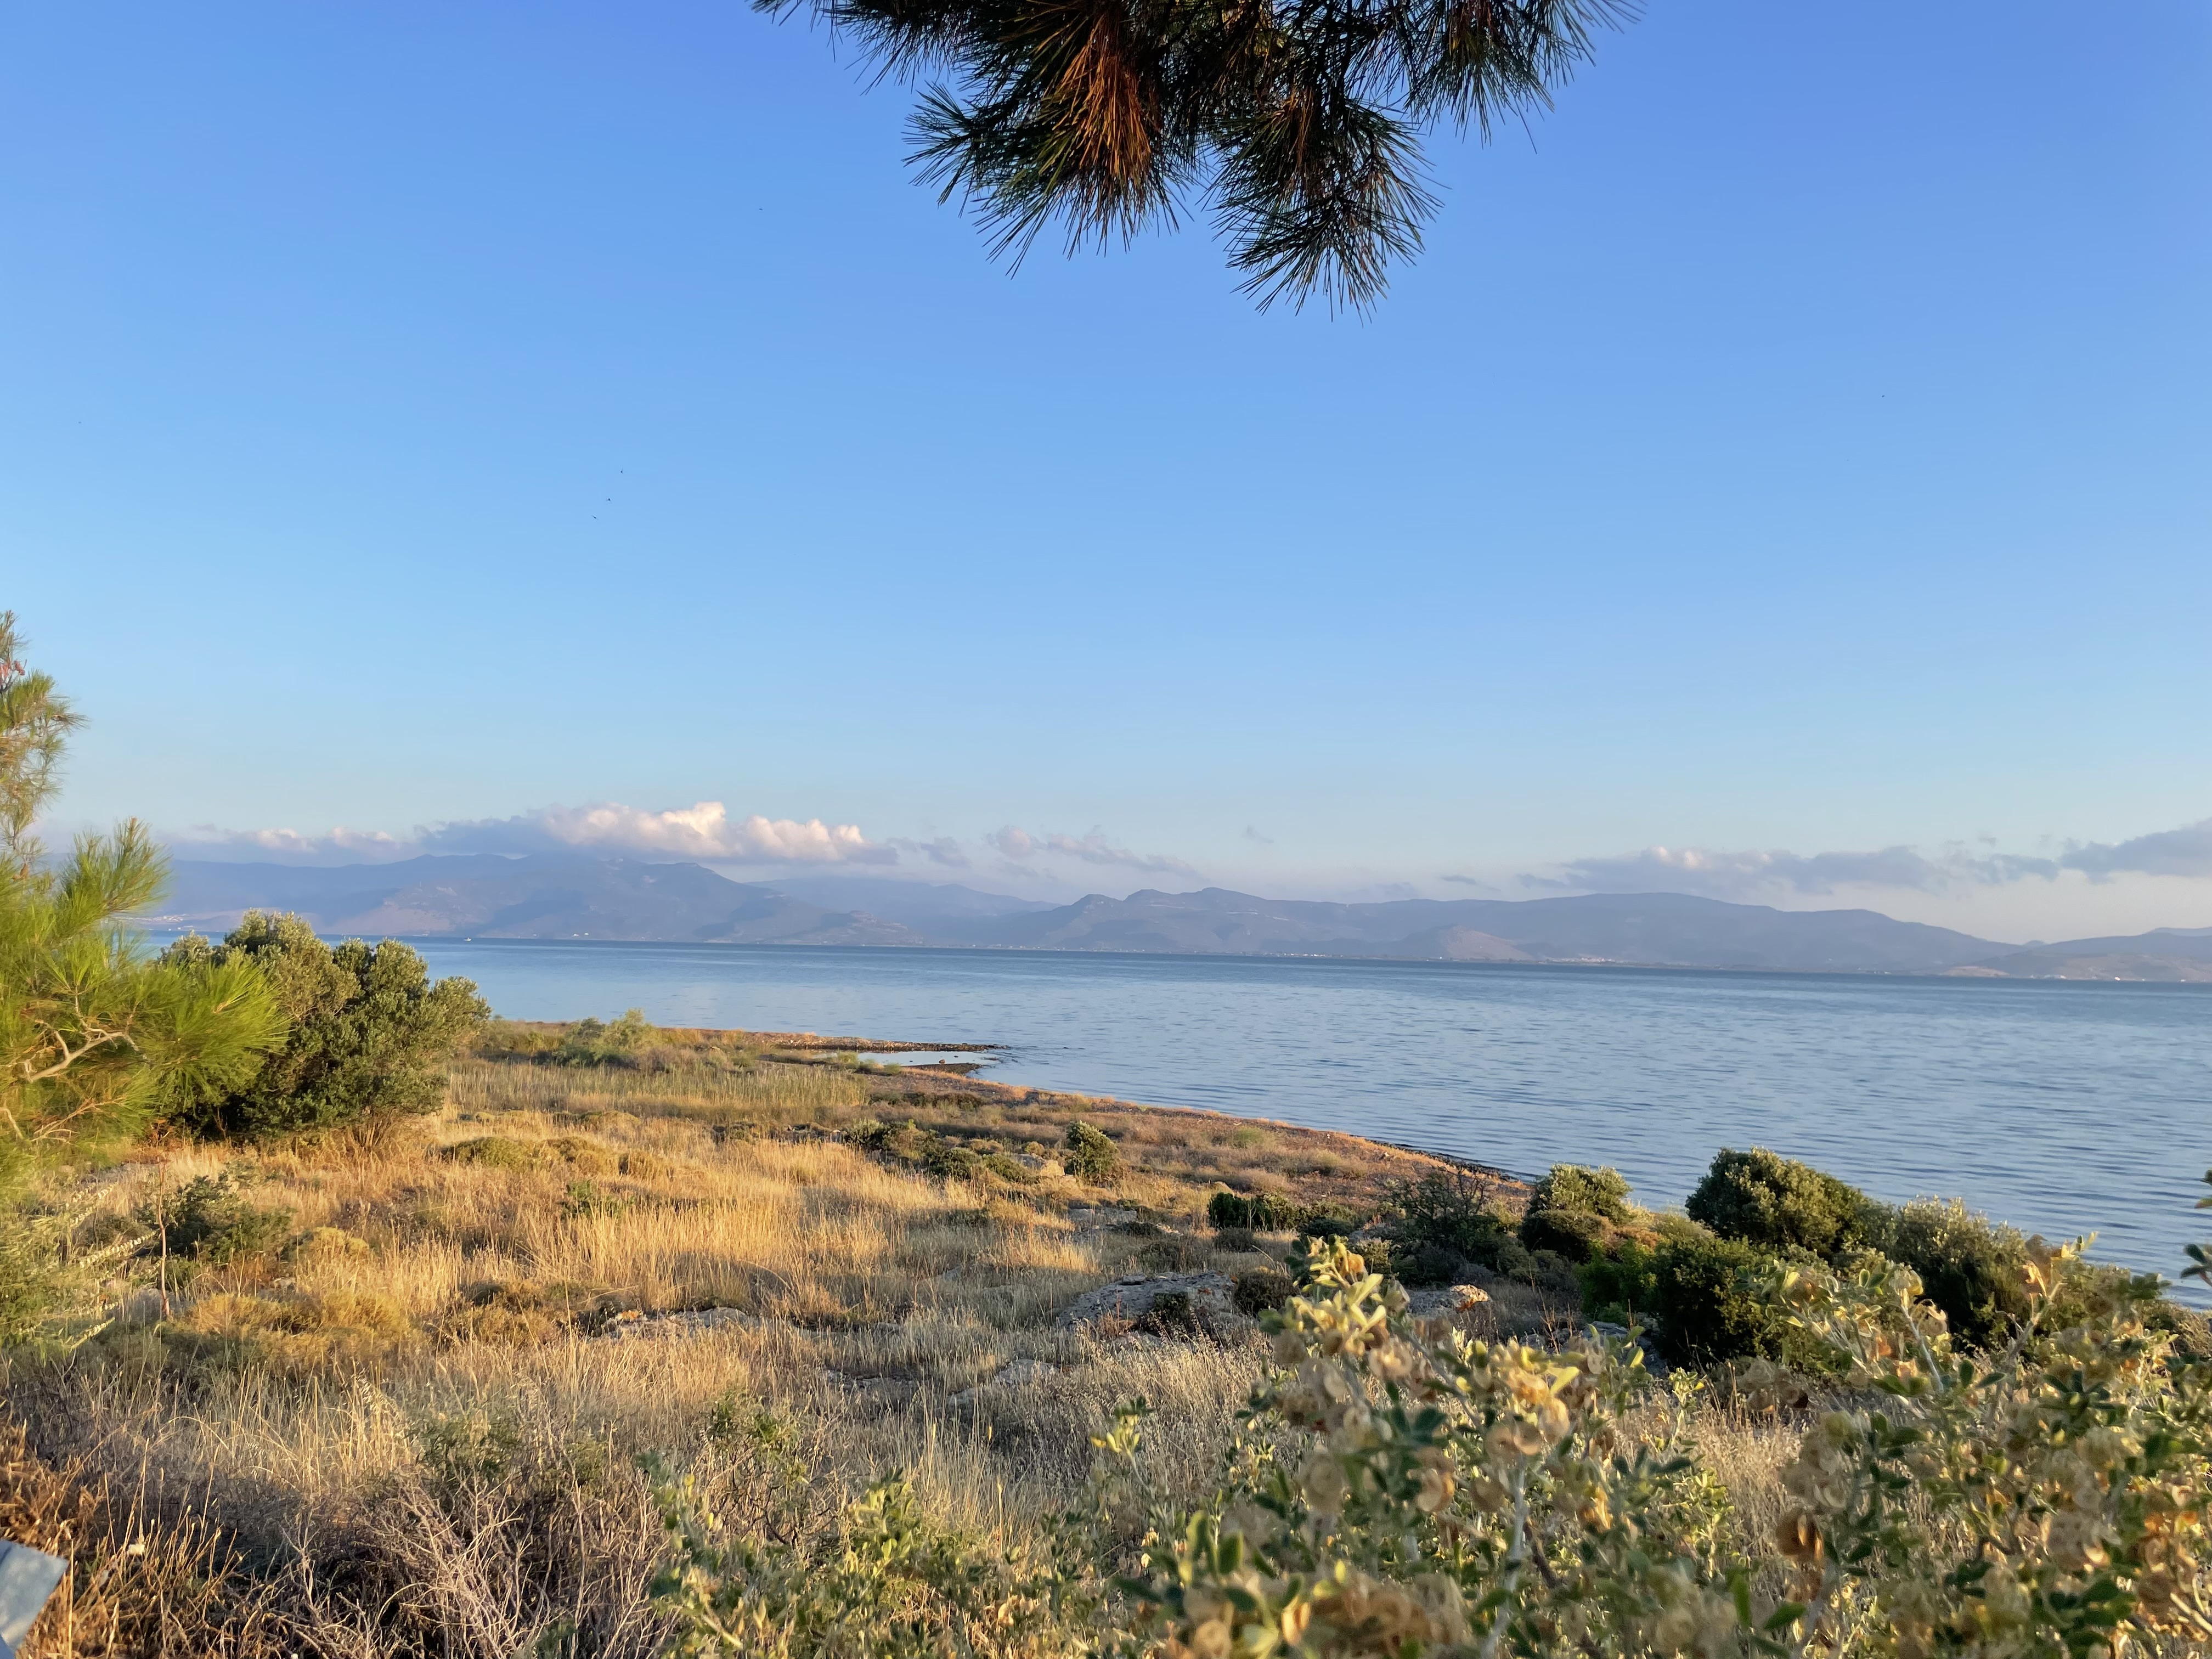 Landscape photo of a field site in Greece, the scrubland butts up against the sea and you can see distant mountains of a separate island.